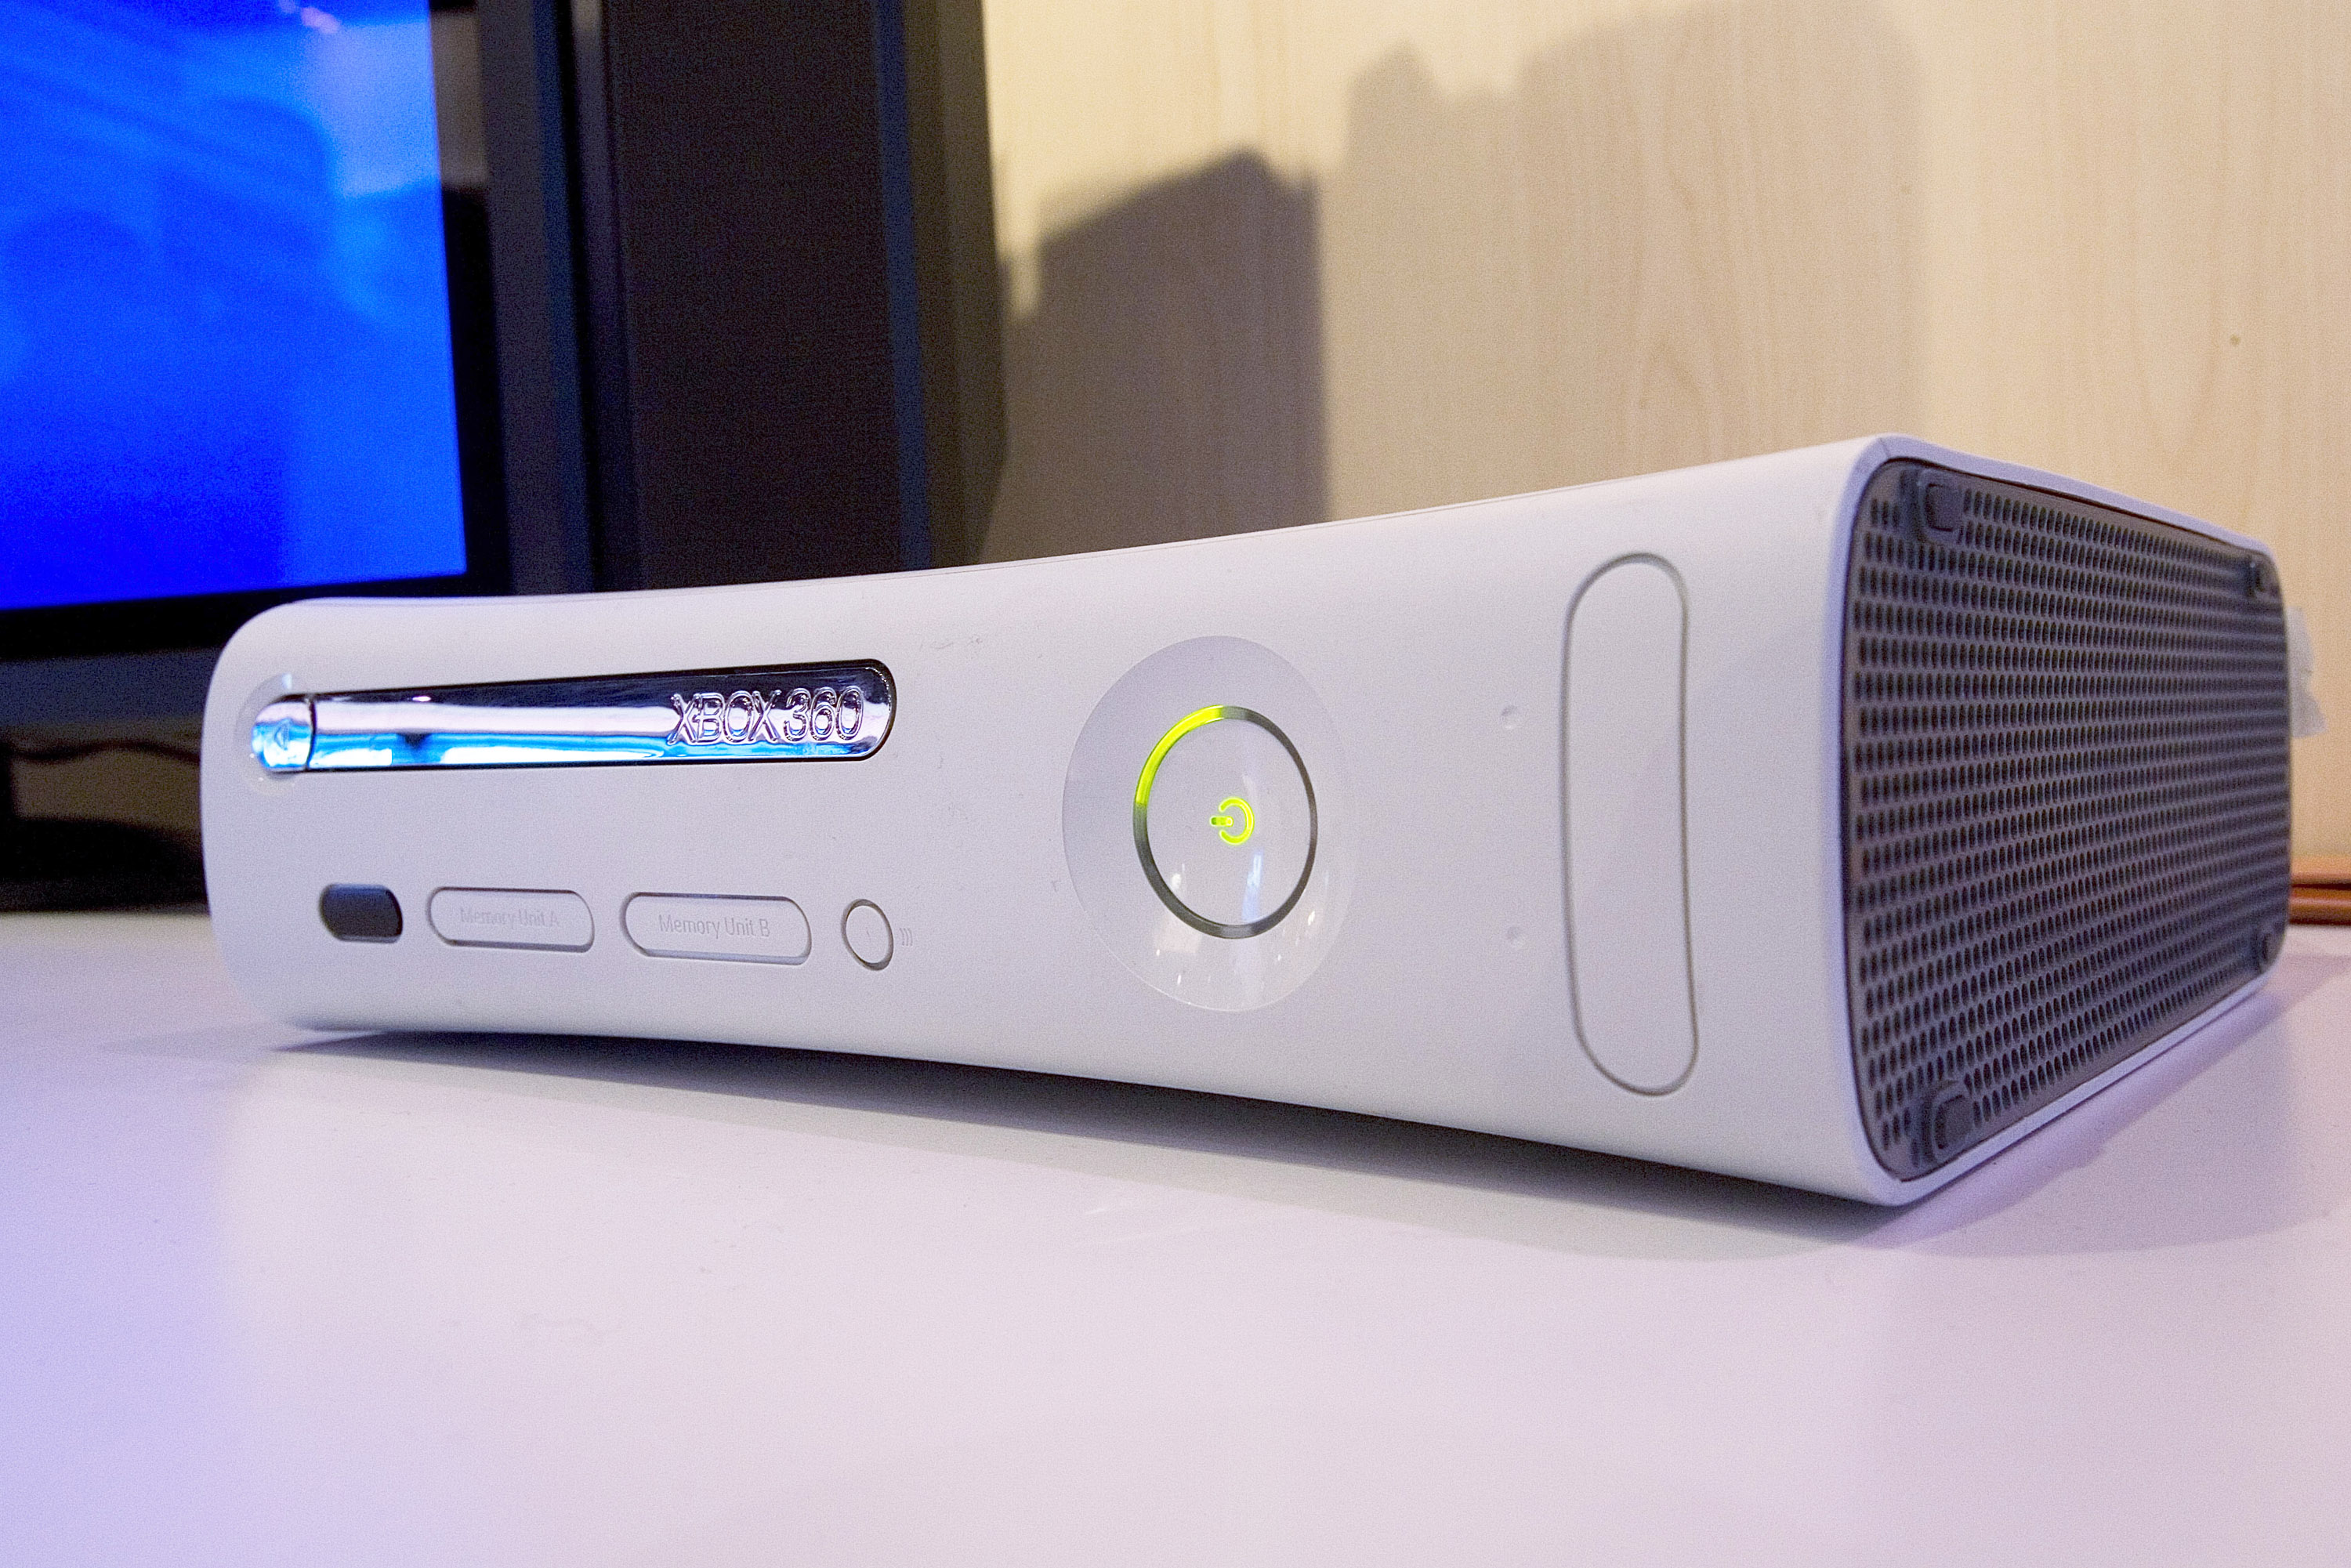 The Microsoft XBOX 360 is seen at the 2008 International Consumer Electronics Show at the Las Vegas Convention Center January 9, 2008 in Las Vegas, Nevada. (David Paul Morris&mdash;Getty Images)